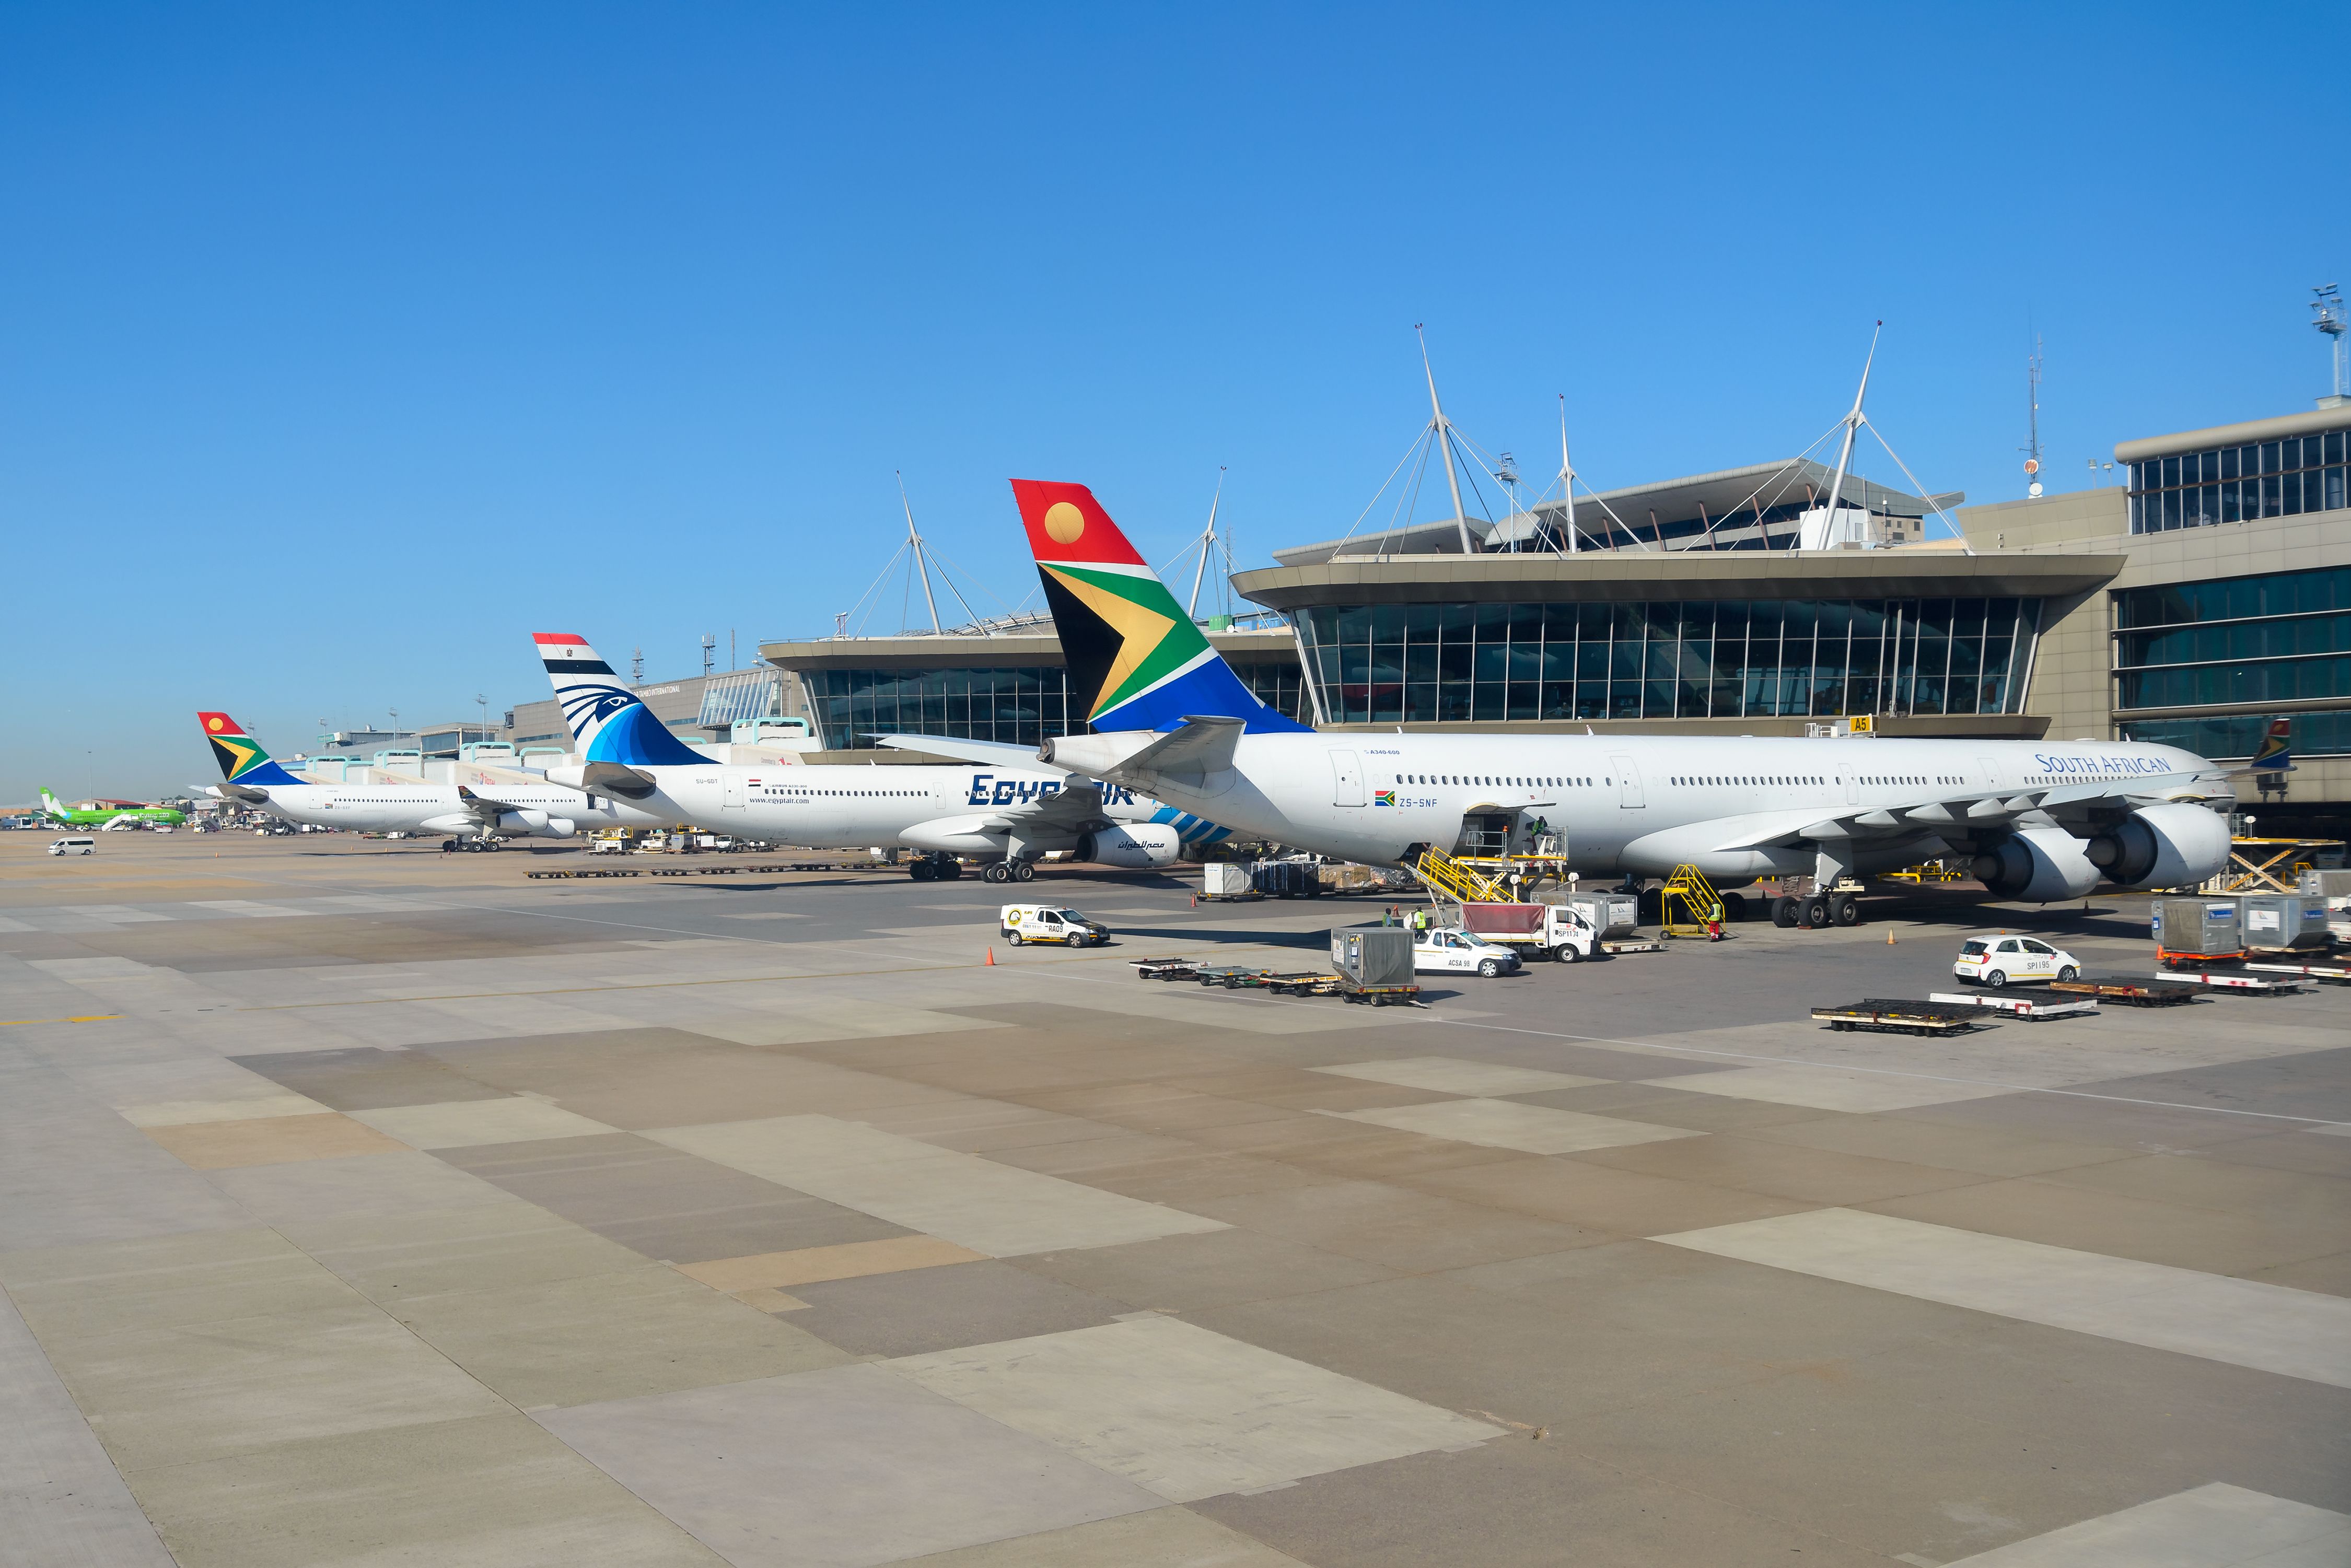 Airline parked at OR Tambo Johannesburg